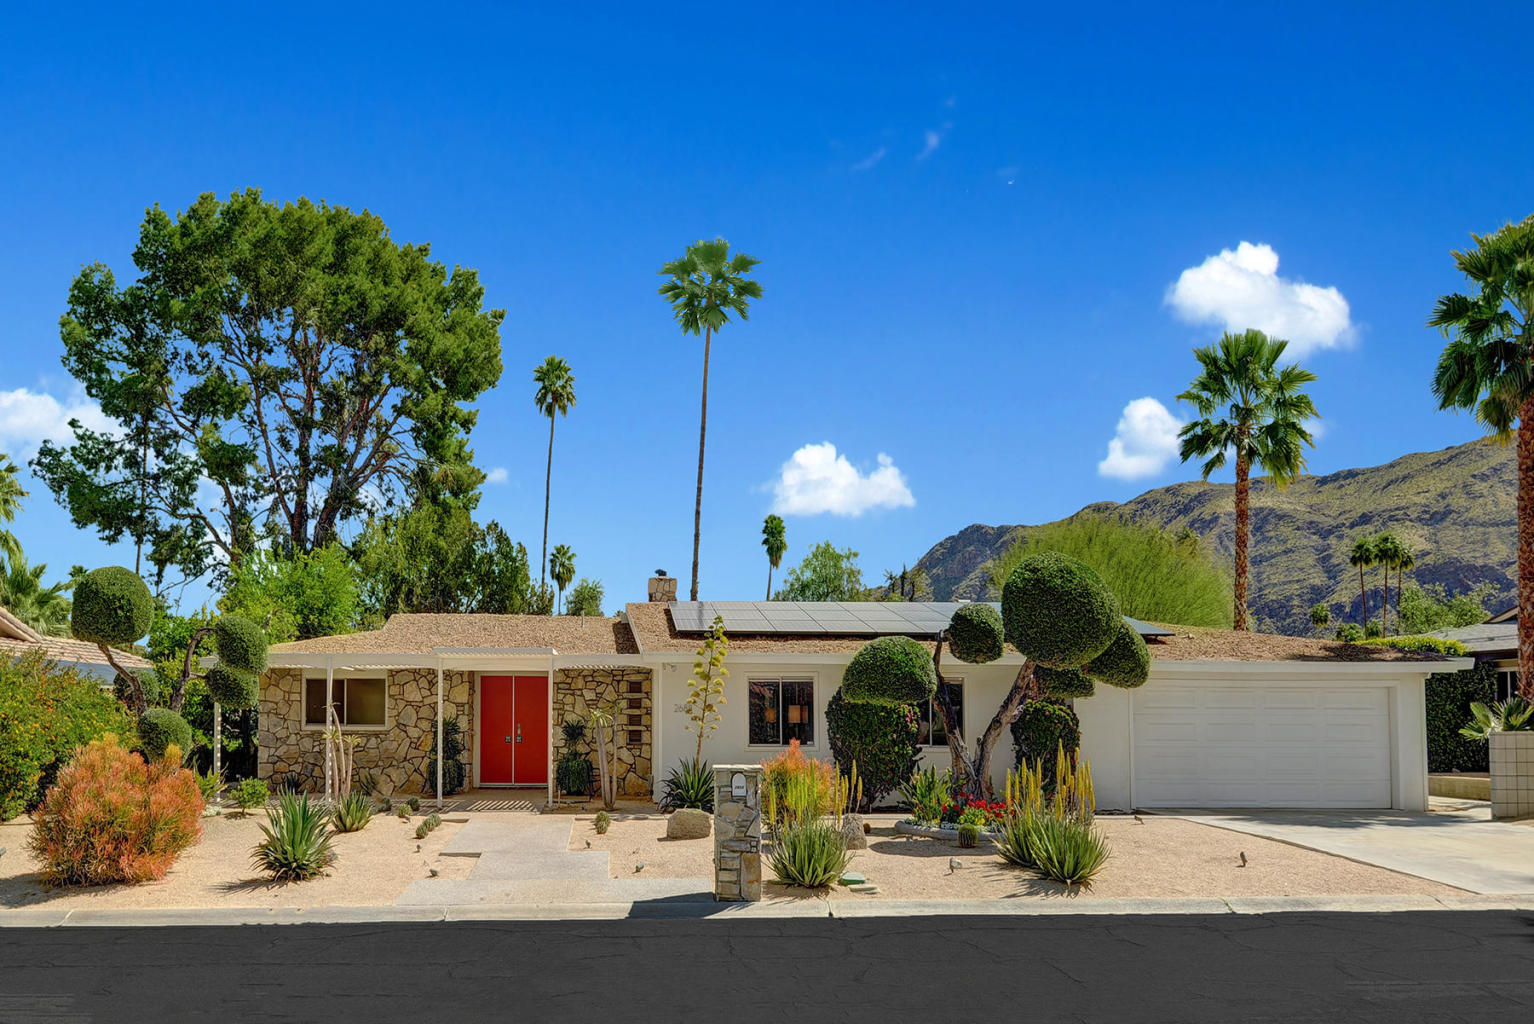 Walt Disney’s former Palm Springs home is on the market